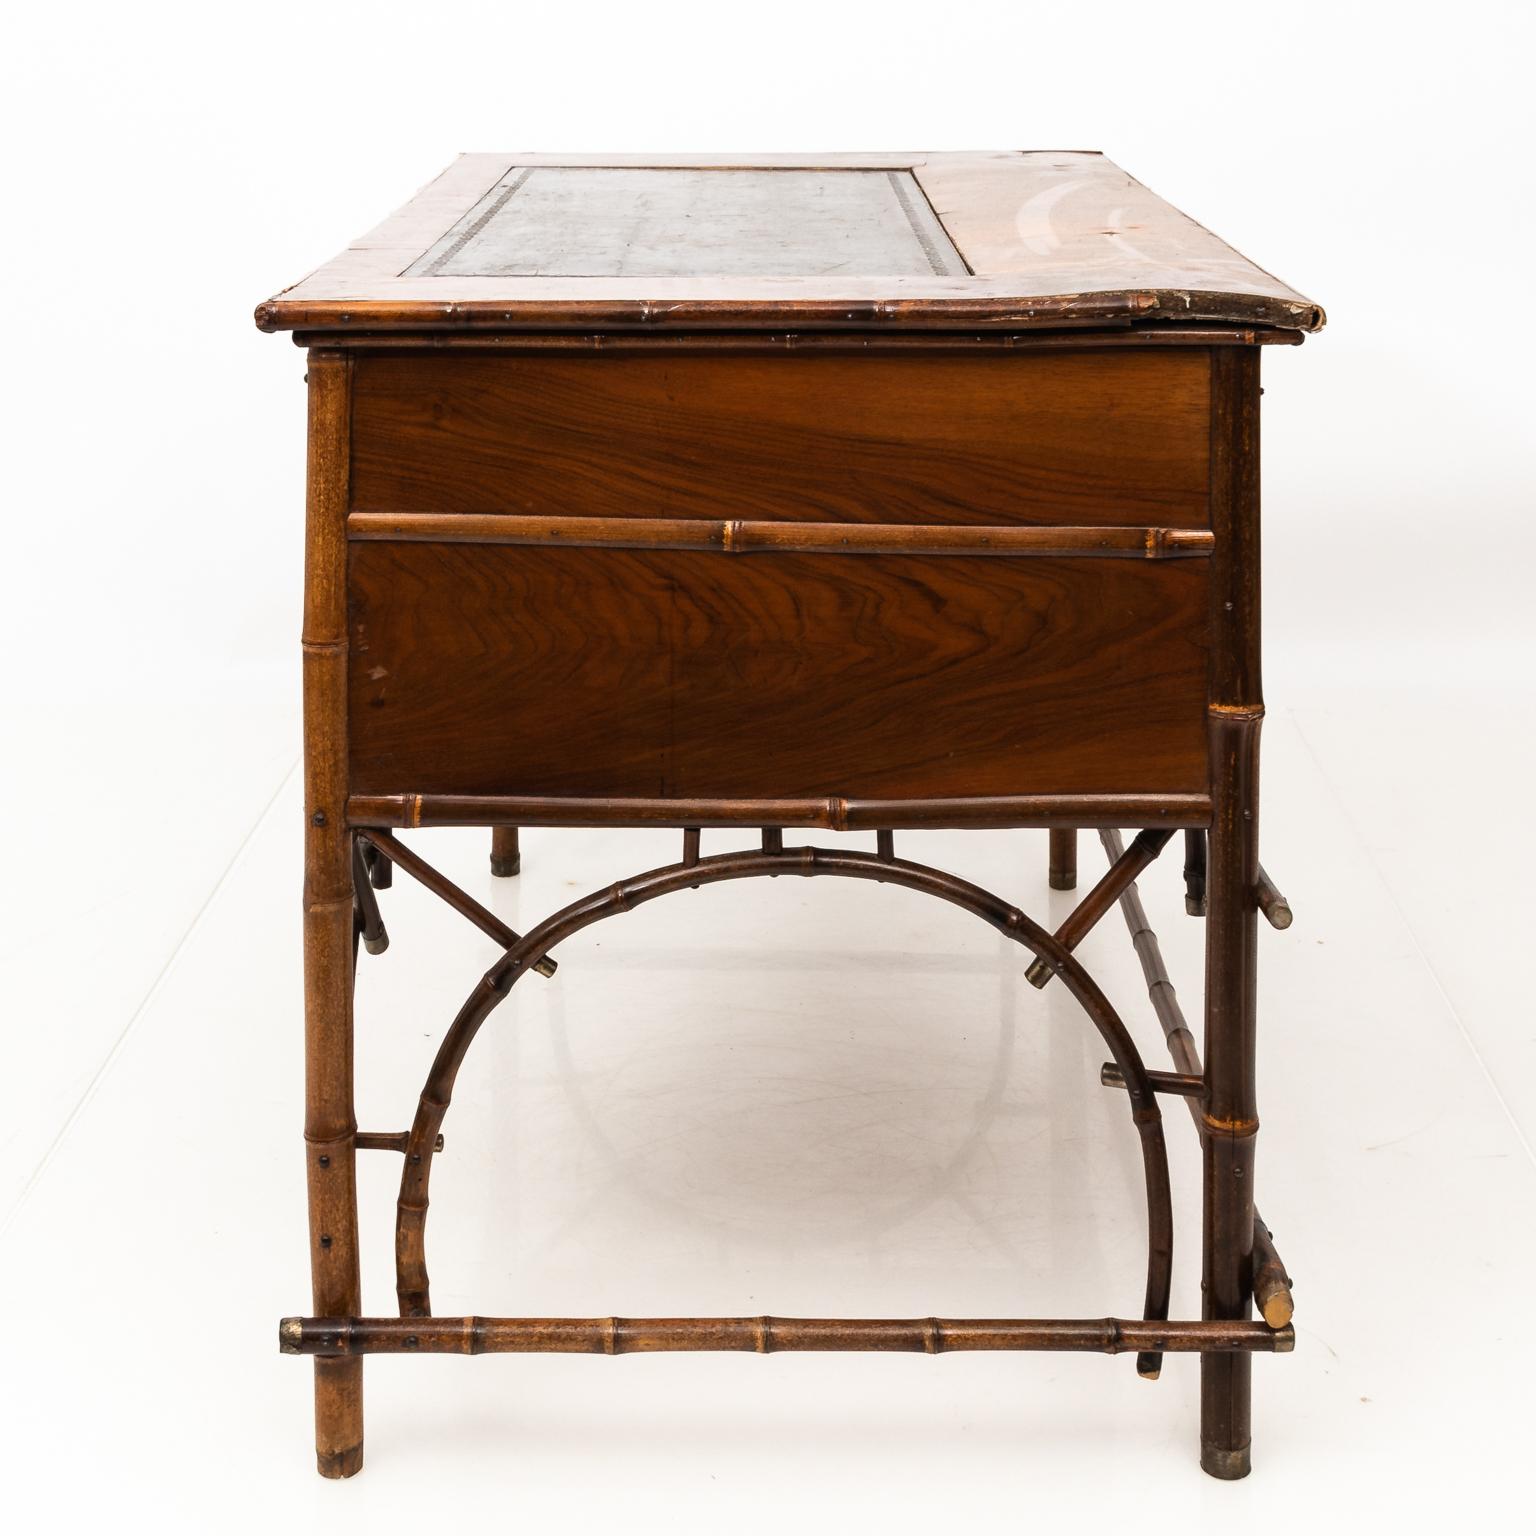 Faux bamboo and leather top Chinoiserie style writing desk with five drawers and original brass hardware, circa late 19th century.
     